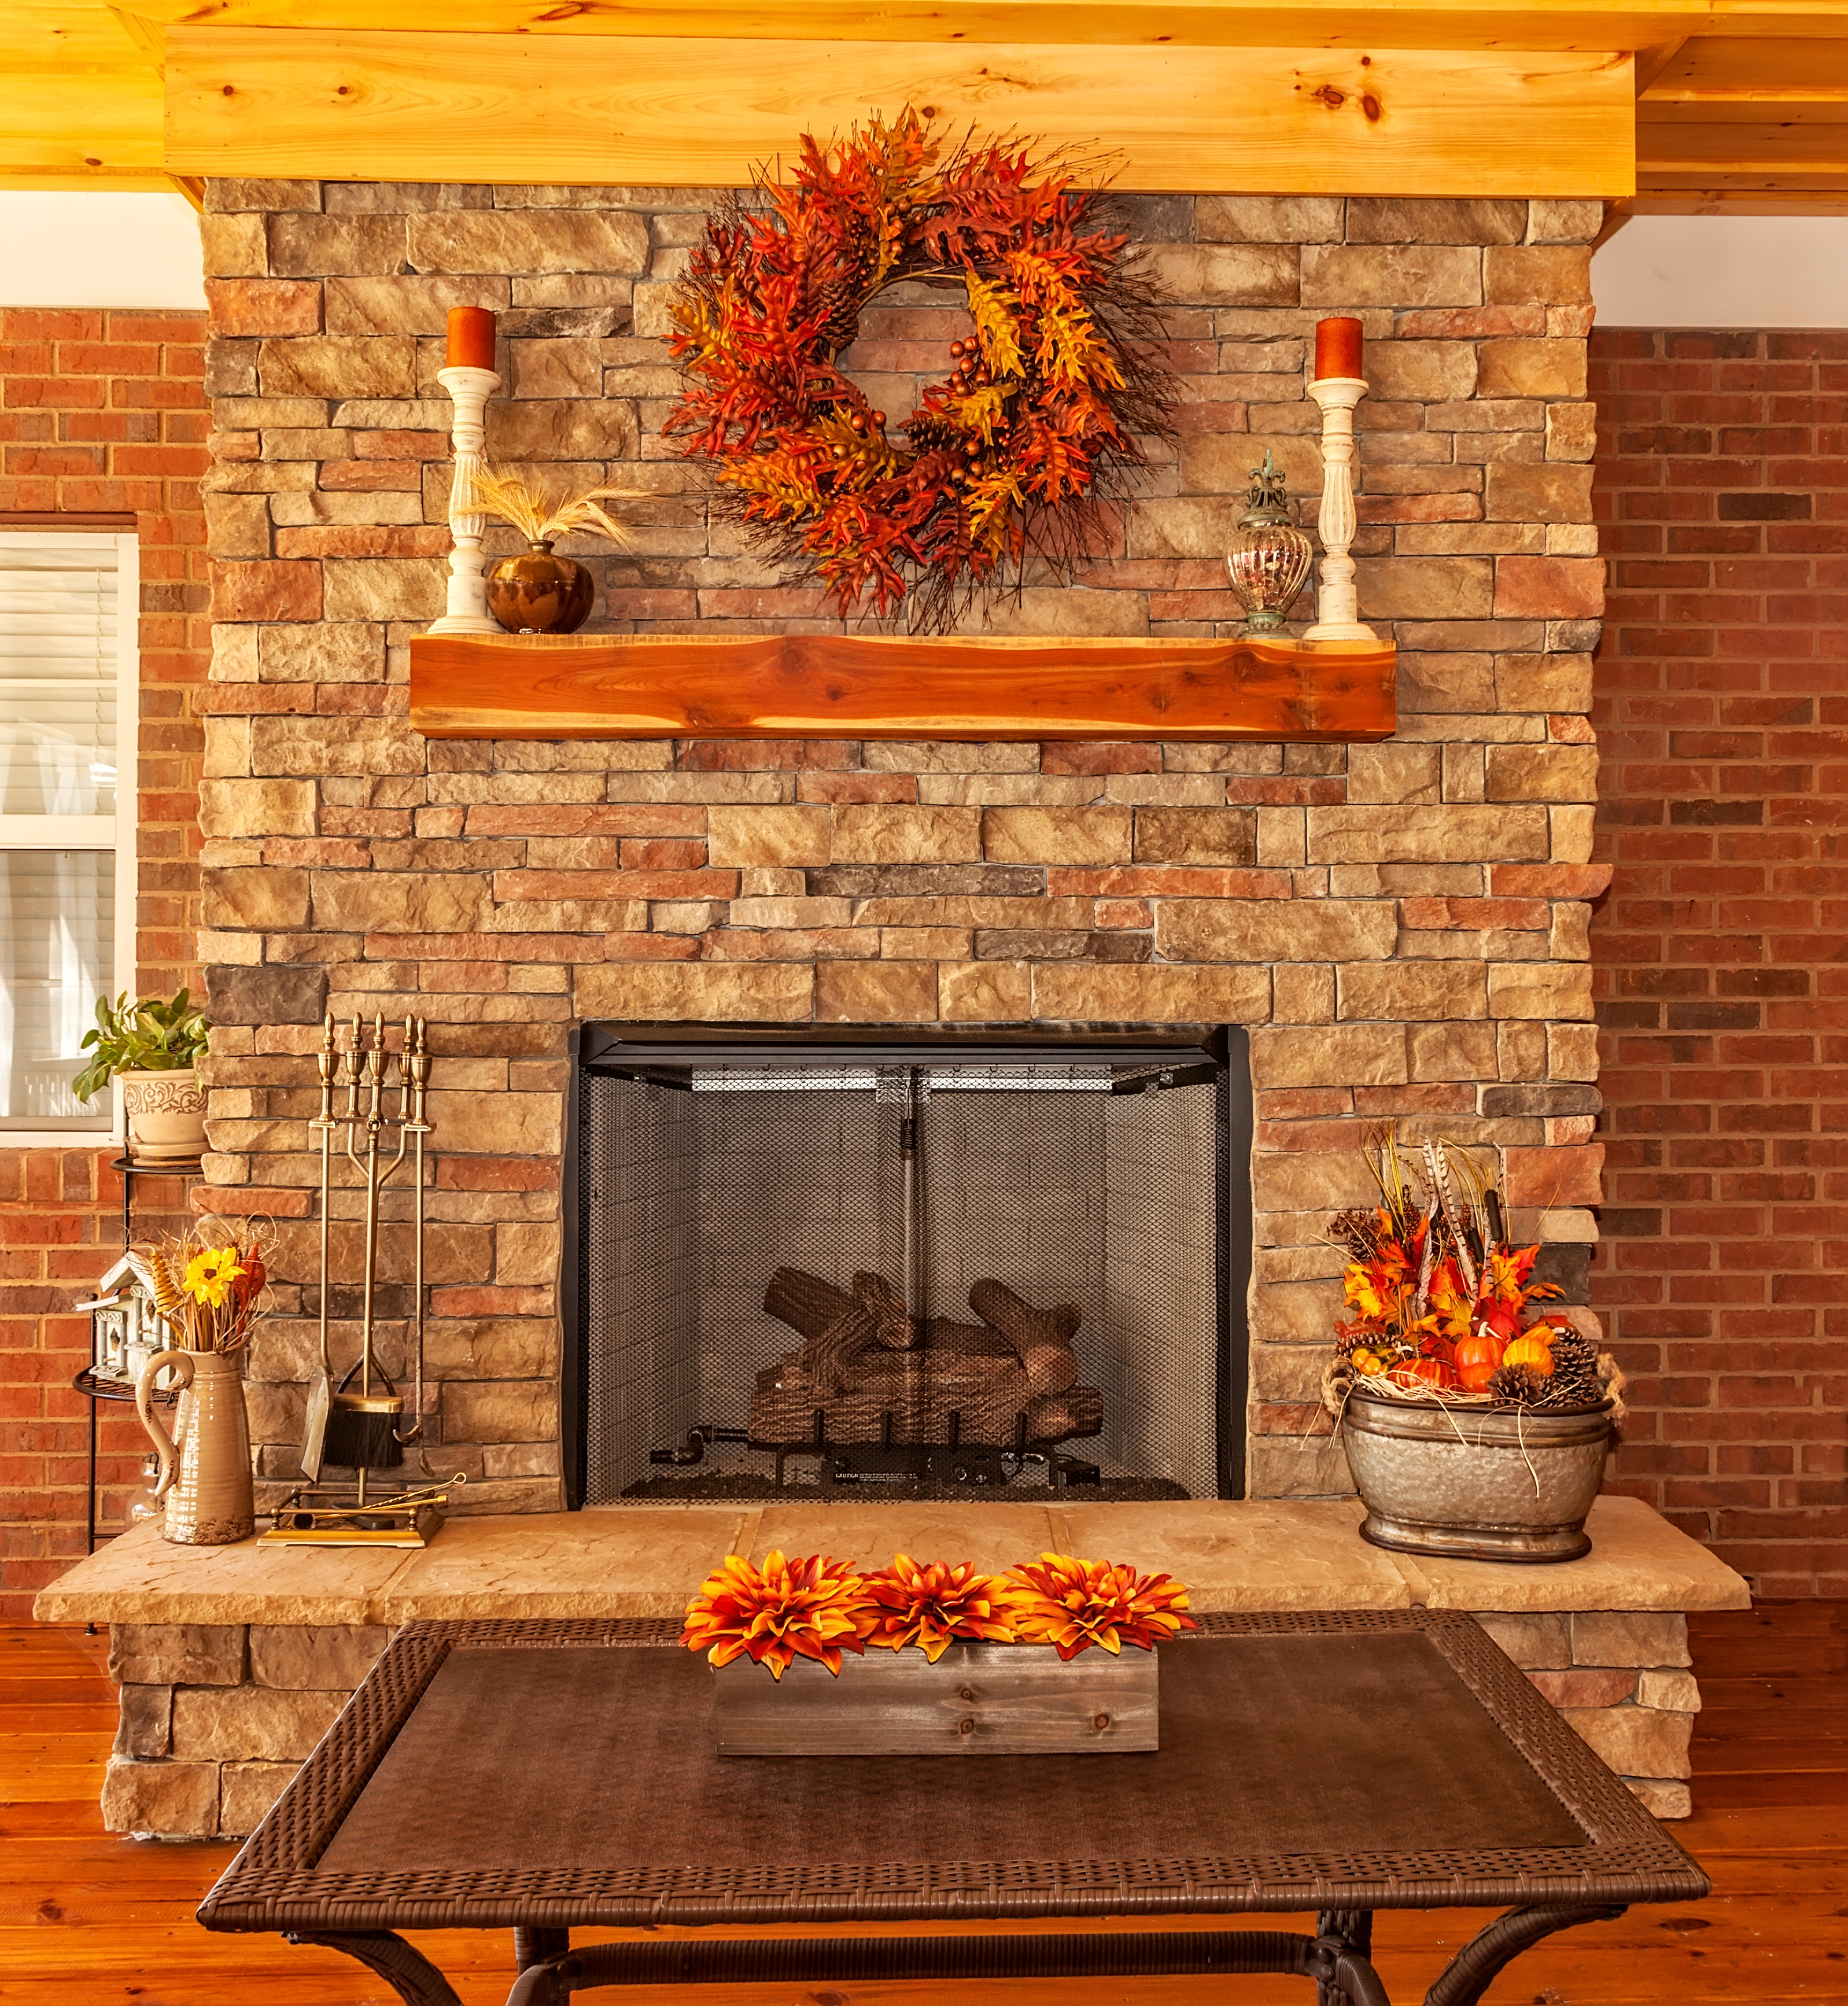 5 Fall Mantel Decorating Ideas That'll Make You Look Like a Pro 70